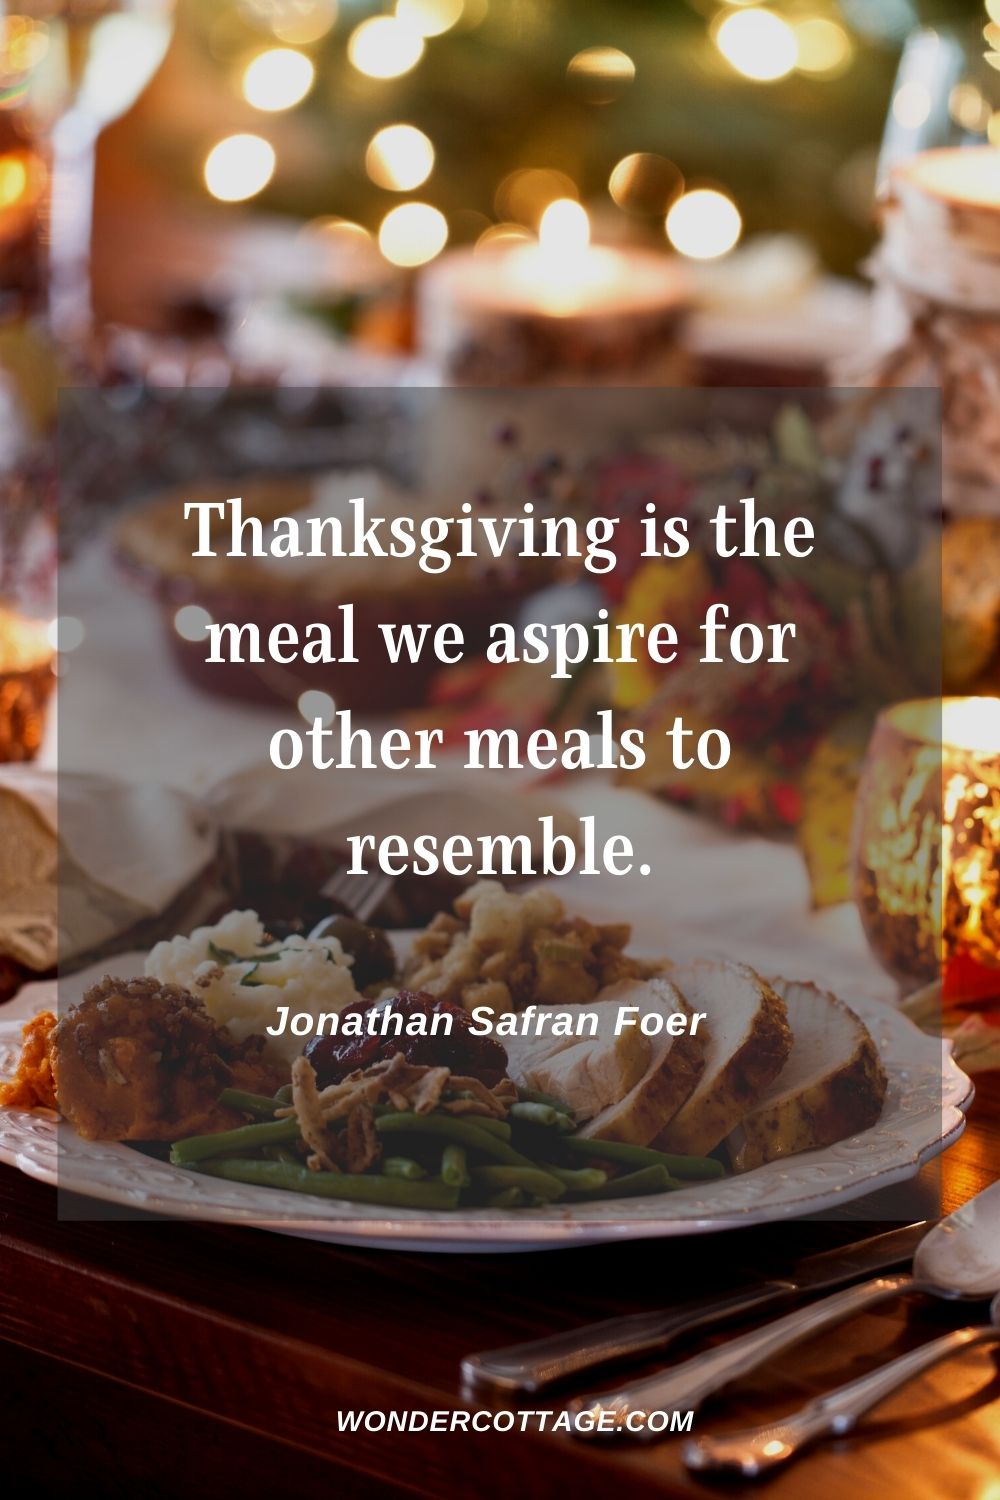 Thanksgiving is the meal we aspire for other meals to resemble. Jonathan Safran Foer